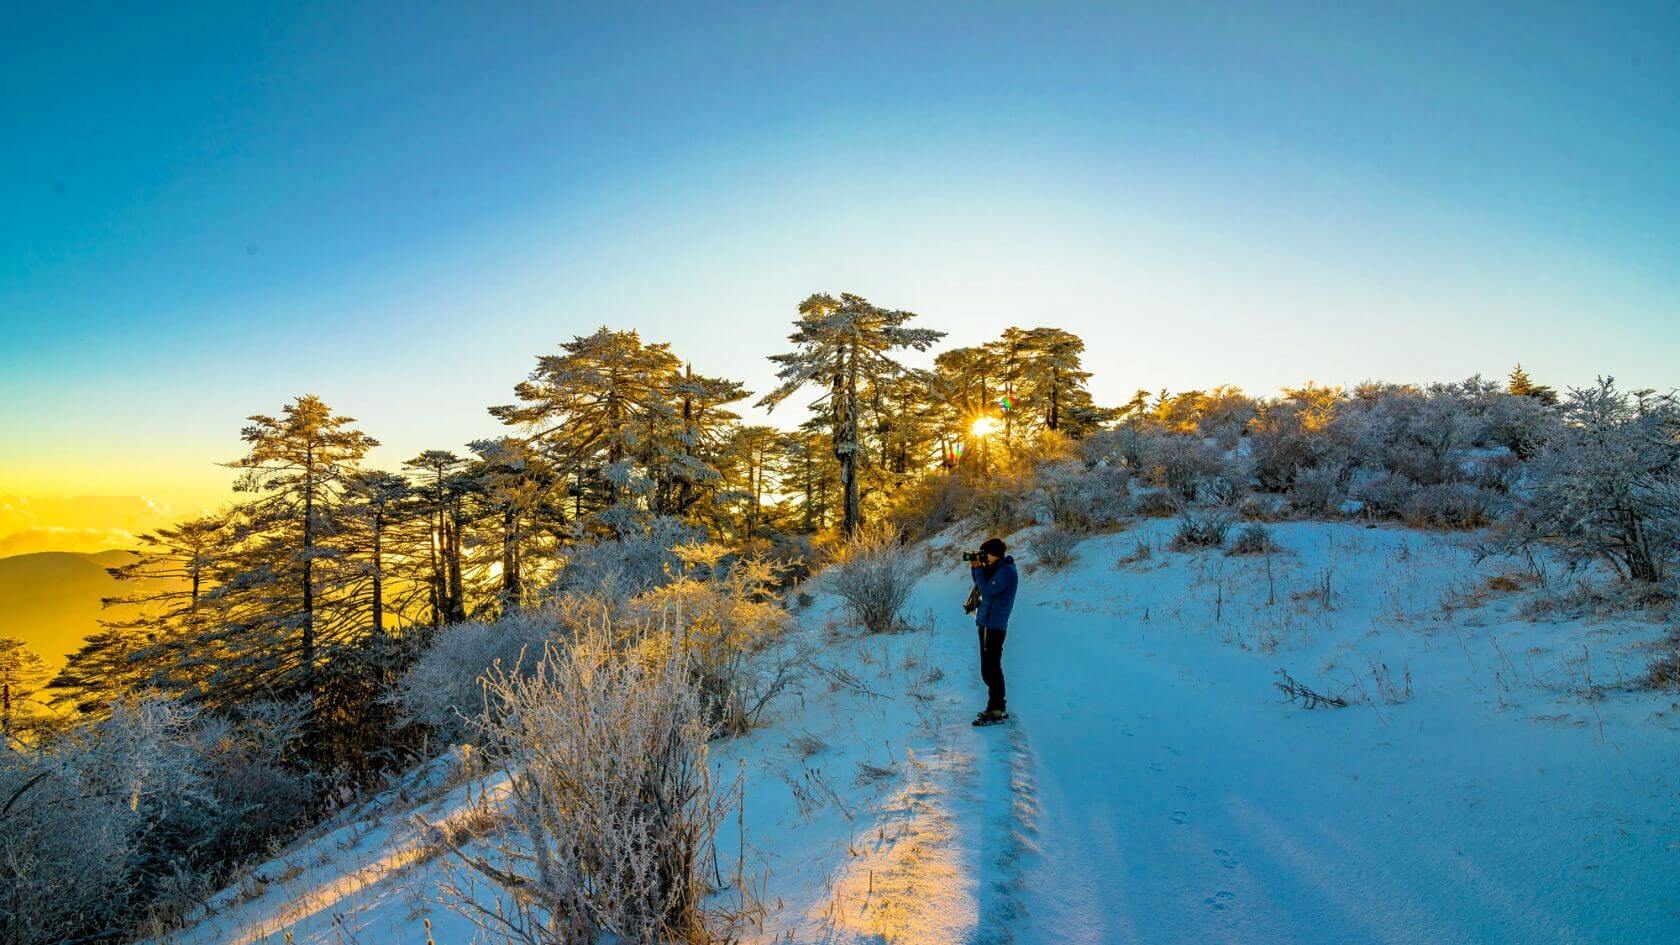 There is a man standing on top of a snowy hill wearing warm jacket, muffler and a hat tacking pictures of the distant view as sun is rising from his right covered with trees.